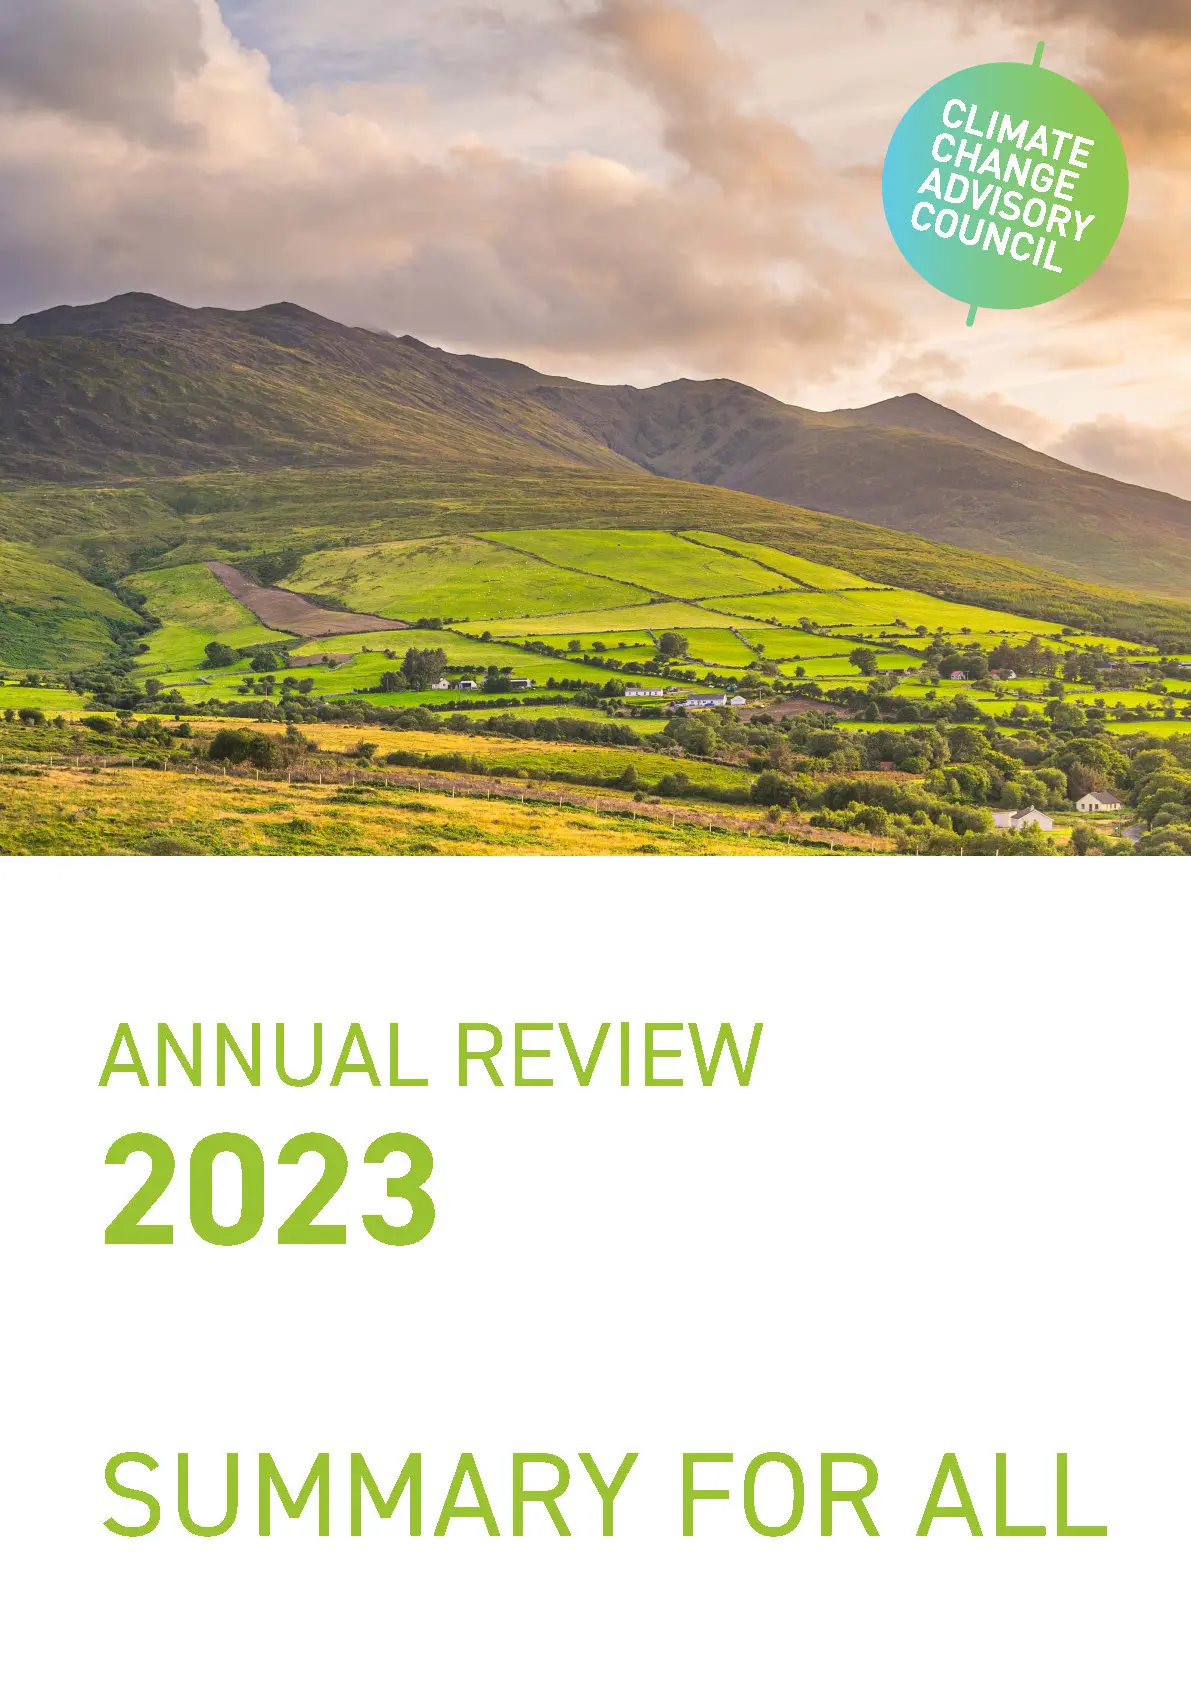 Annual Review 2023 - Summary for All